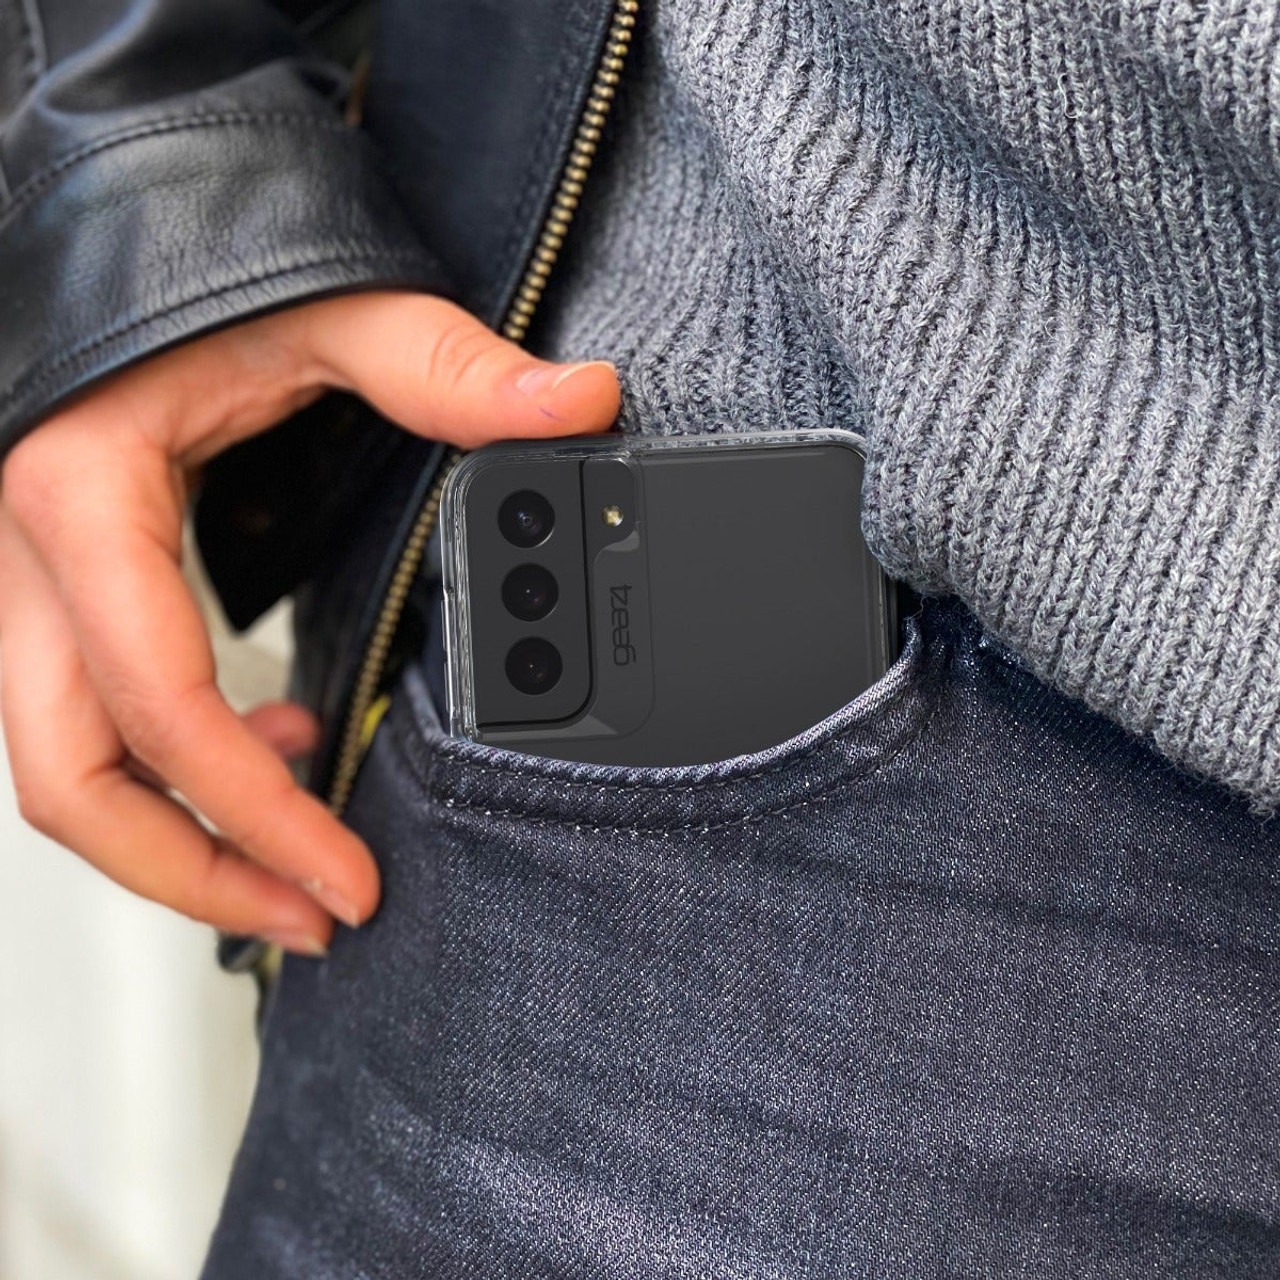 Slim Design||The slim, lightweight design of the Piccadilly fits easily in your pocket and comfortably in your hand.